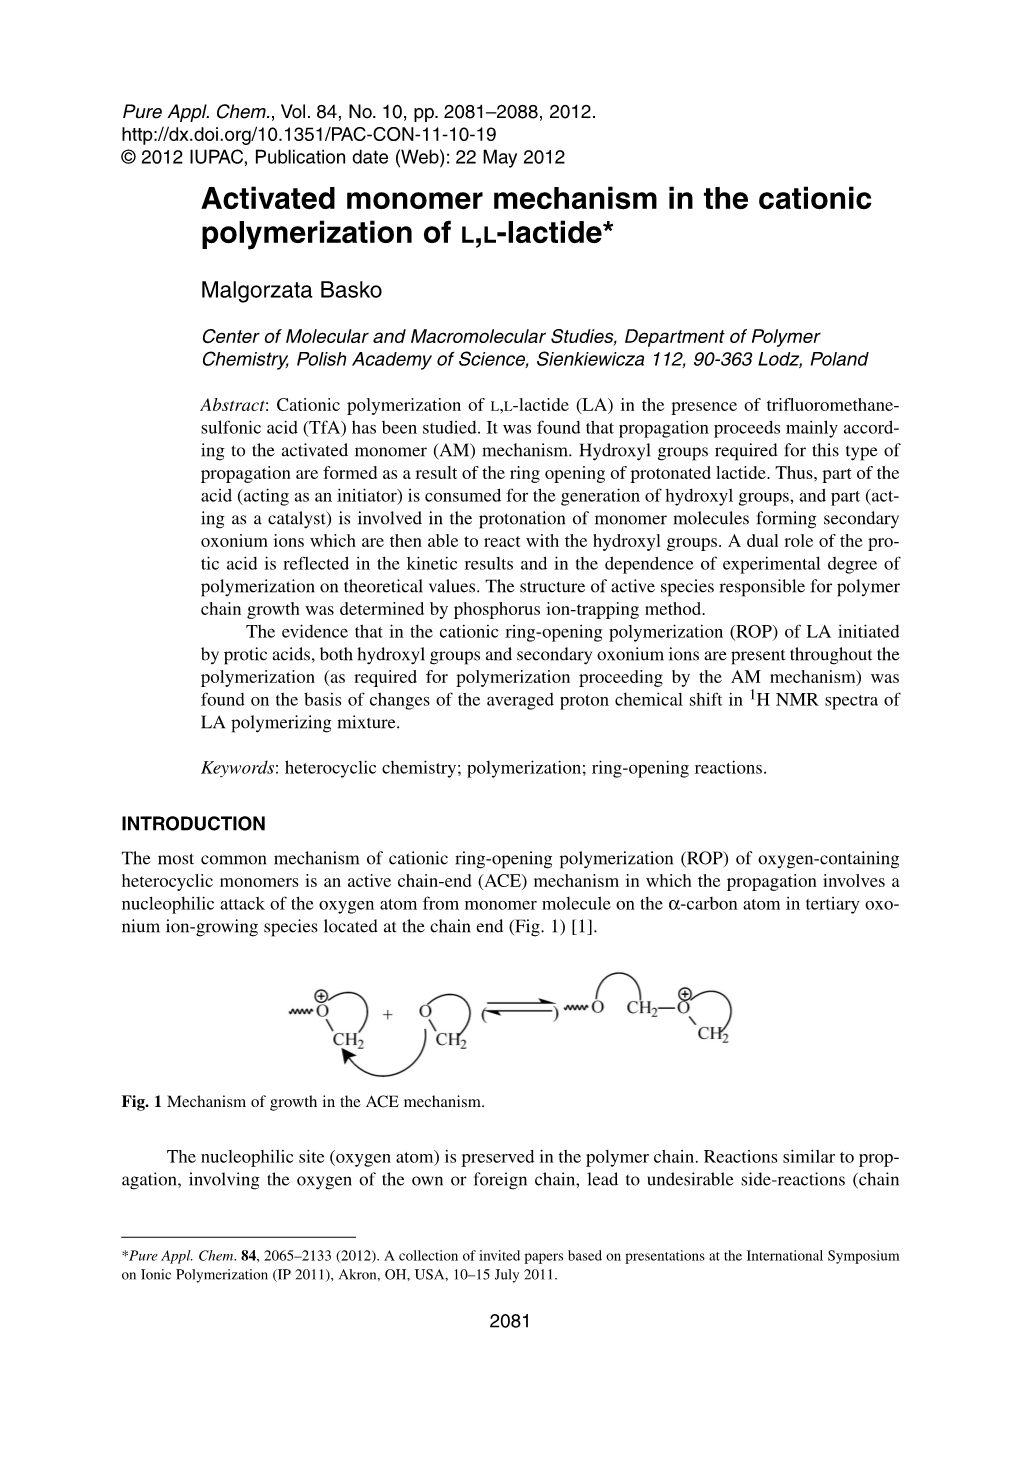 Activated Monomer Mechanism in the Cationic Polymerization of L,L-Lactide*